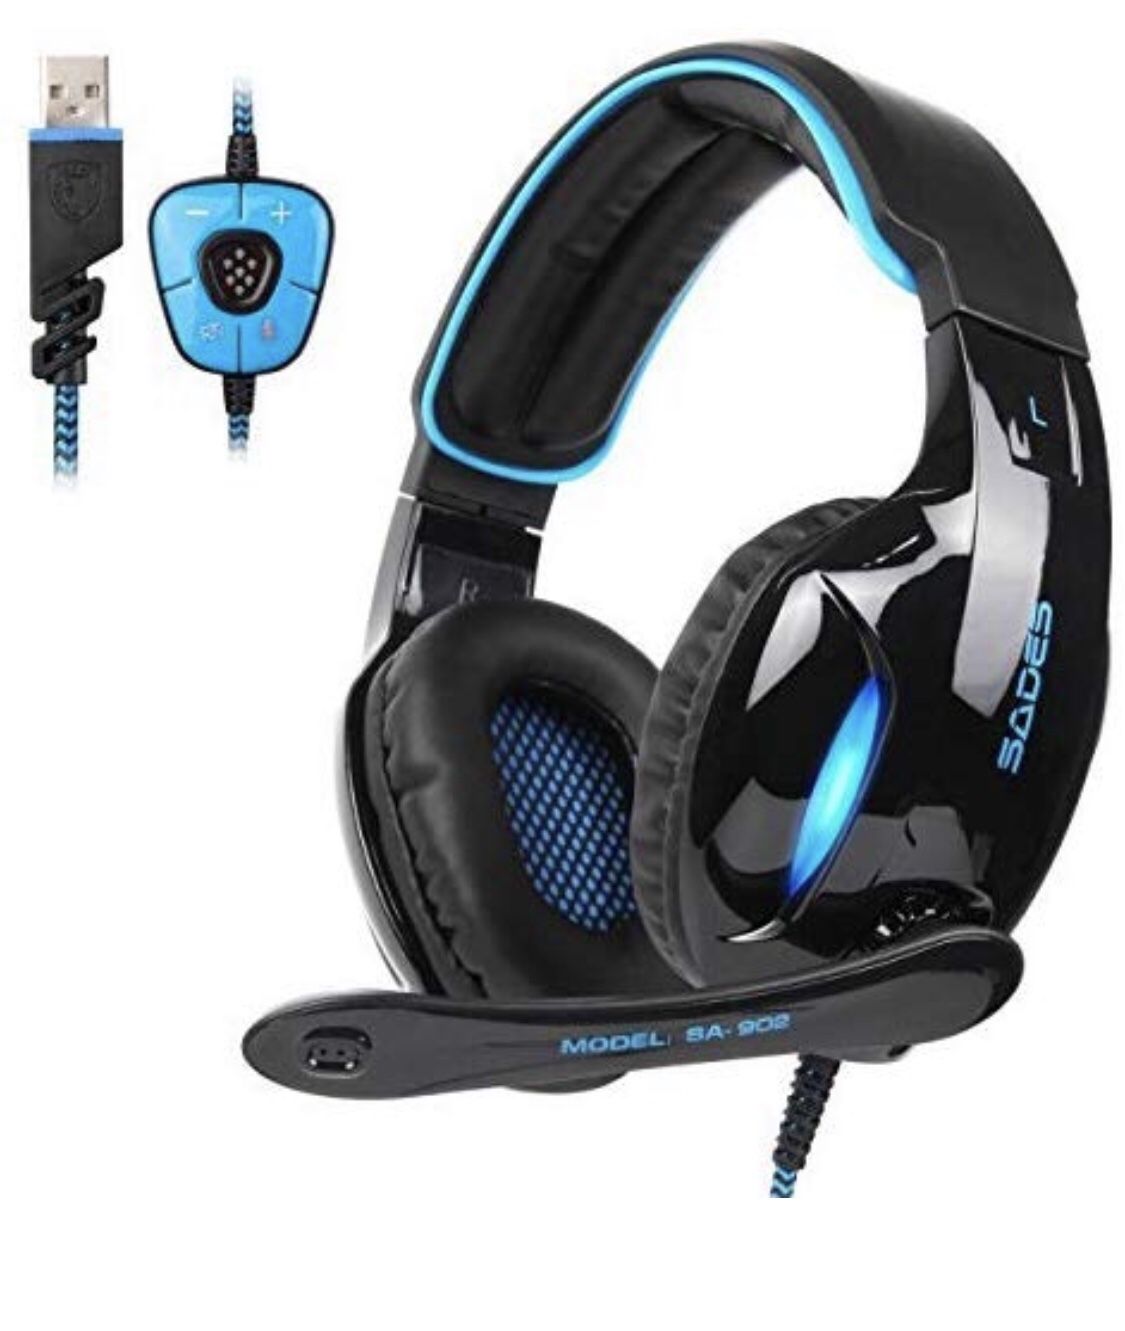 SADES SA902 7.1 USB Surround Sound PC Headsets Over-Ear Gaming Headphones with Microphone LED Light